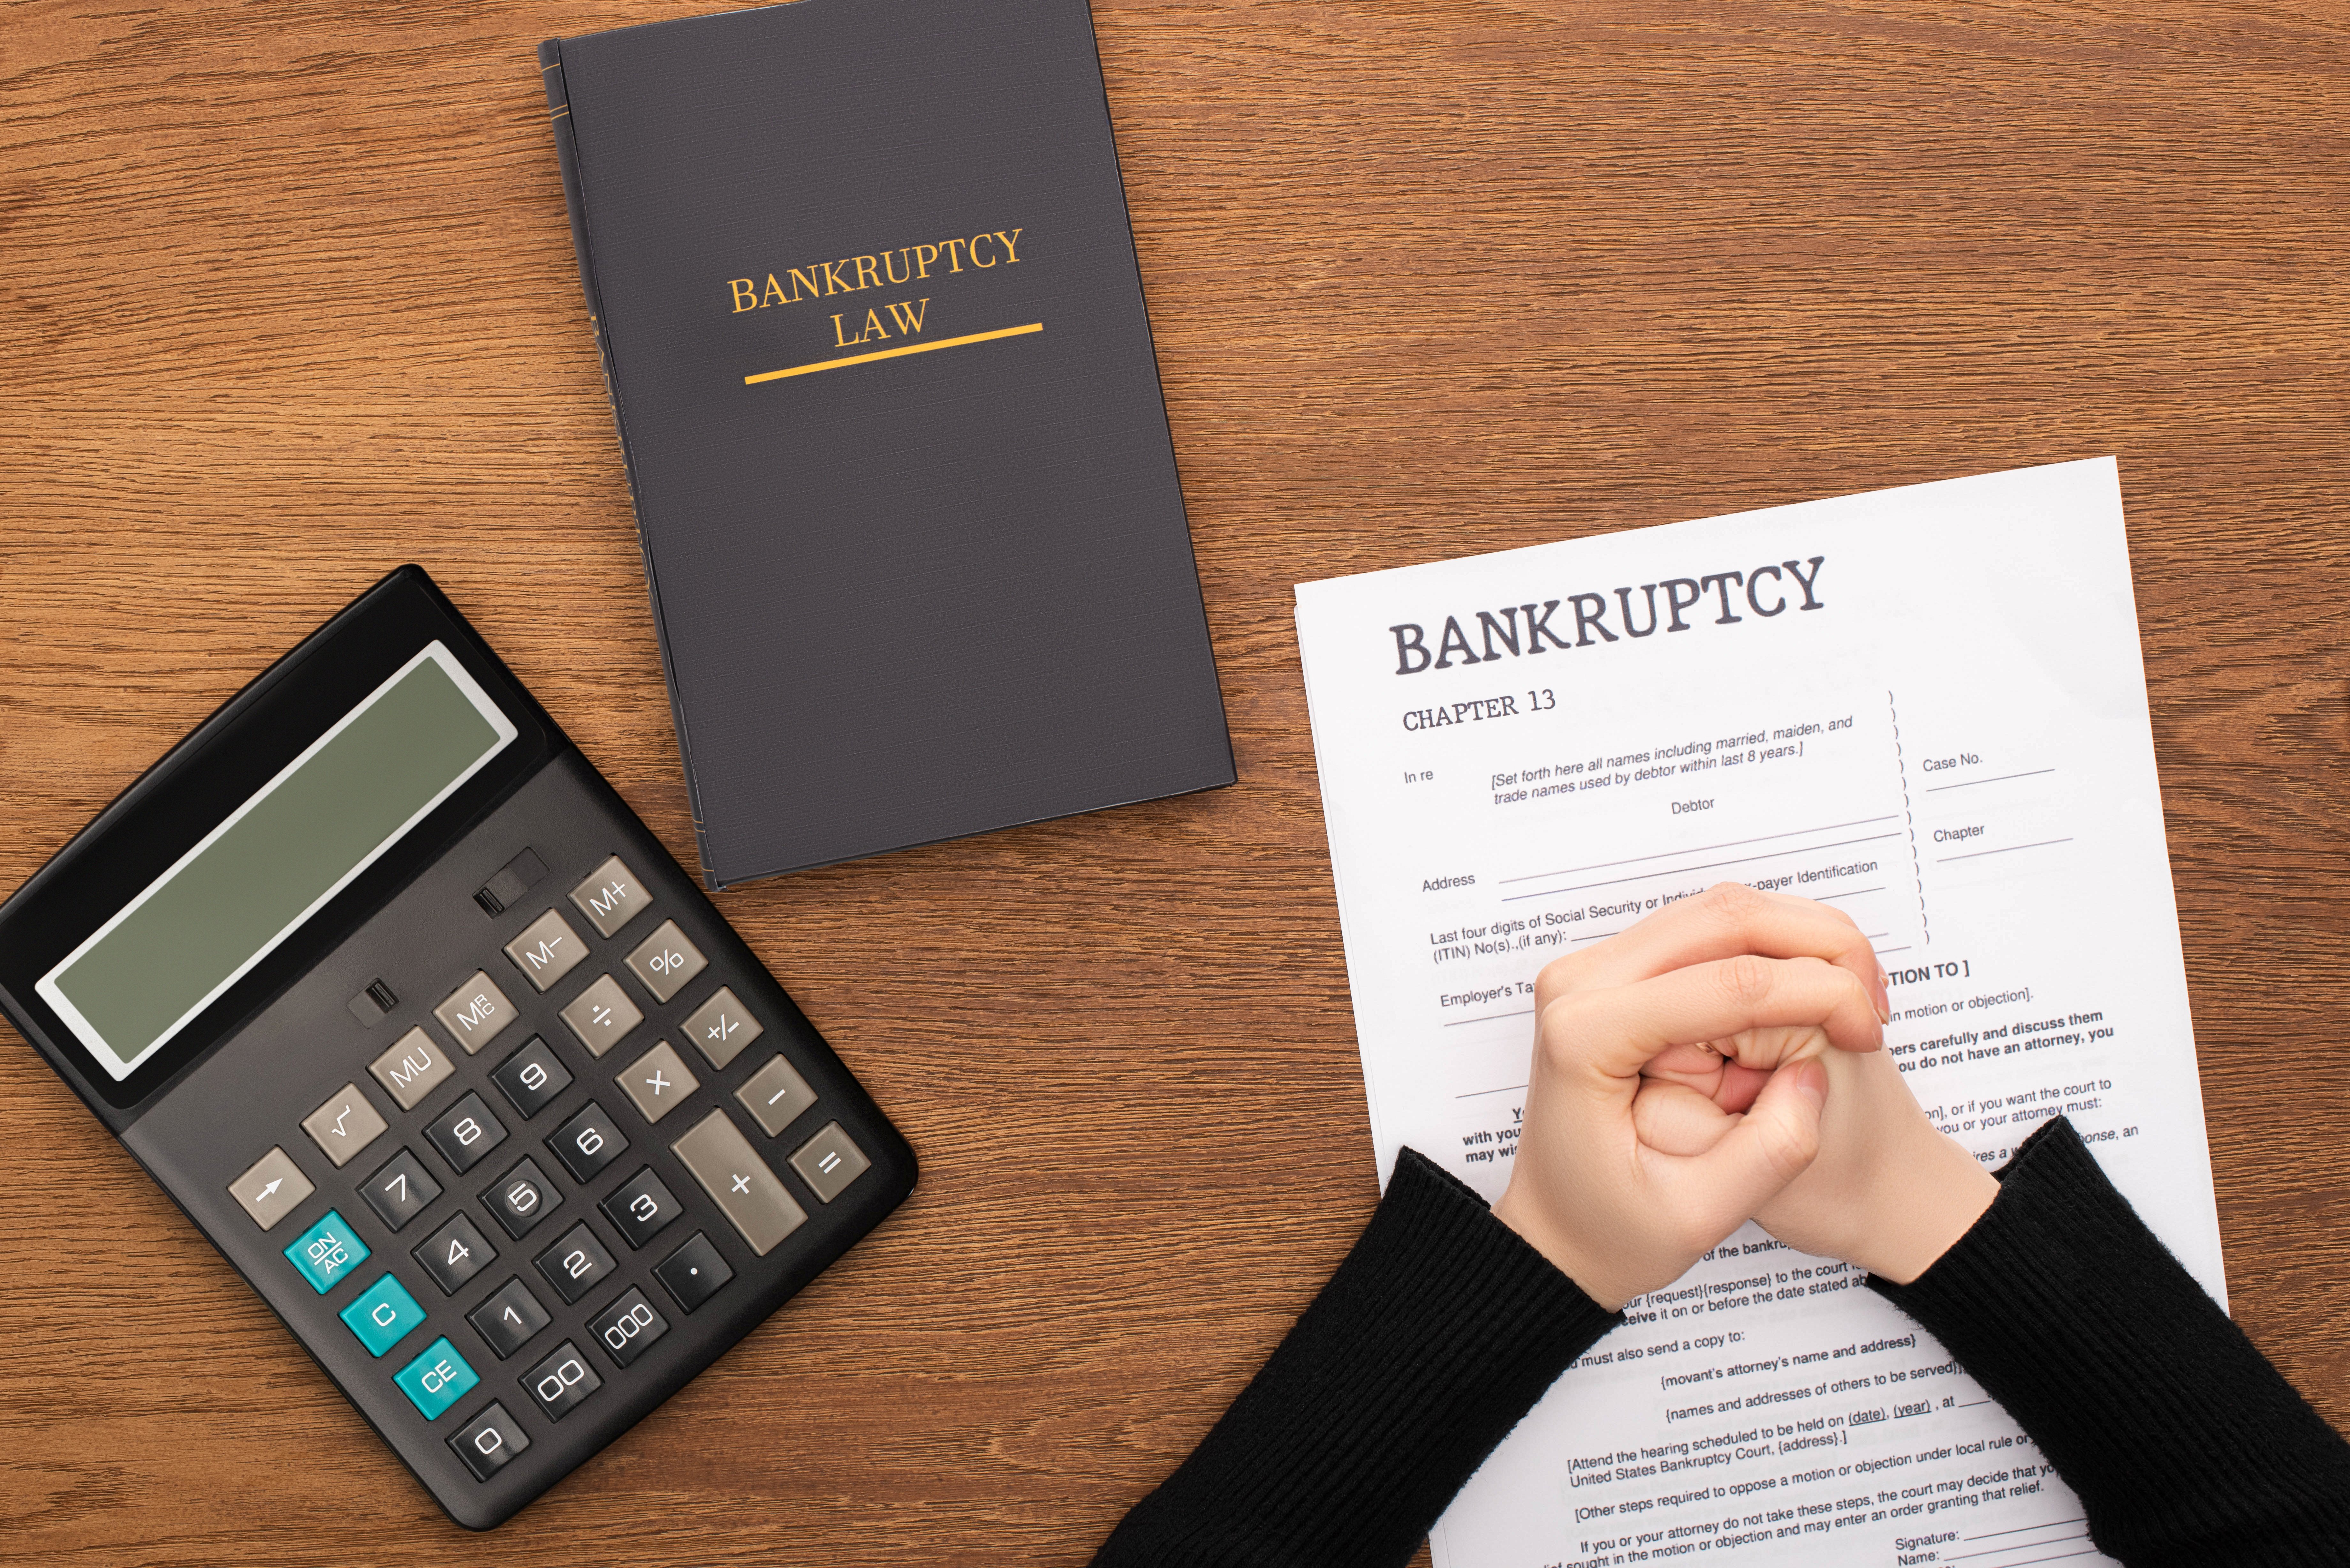 Considering Filing for Bankruptcy: Do’s and Don’ts